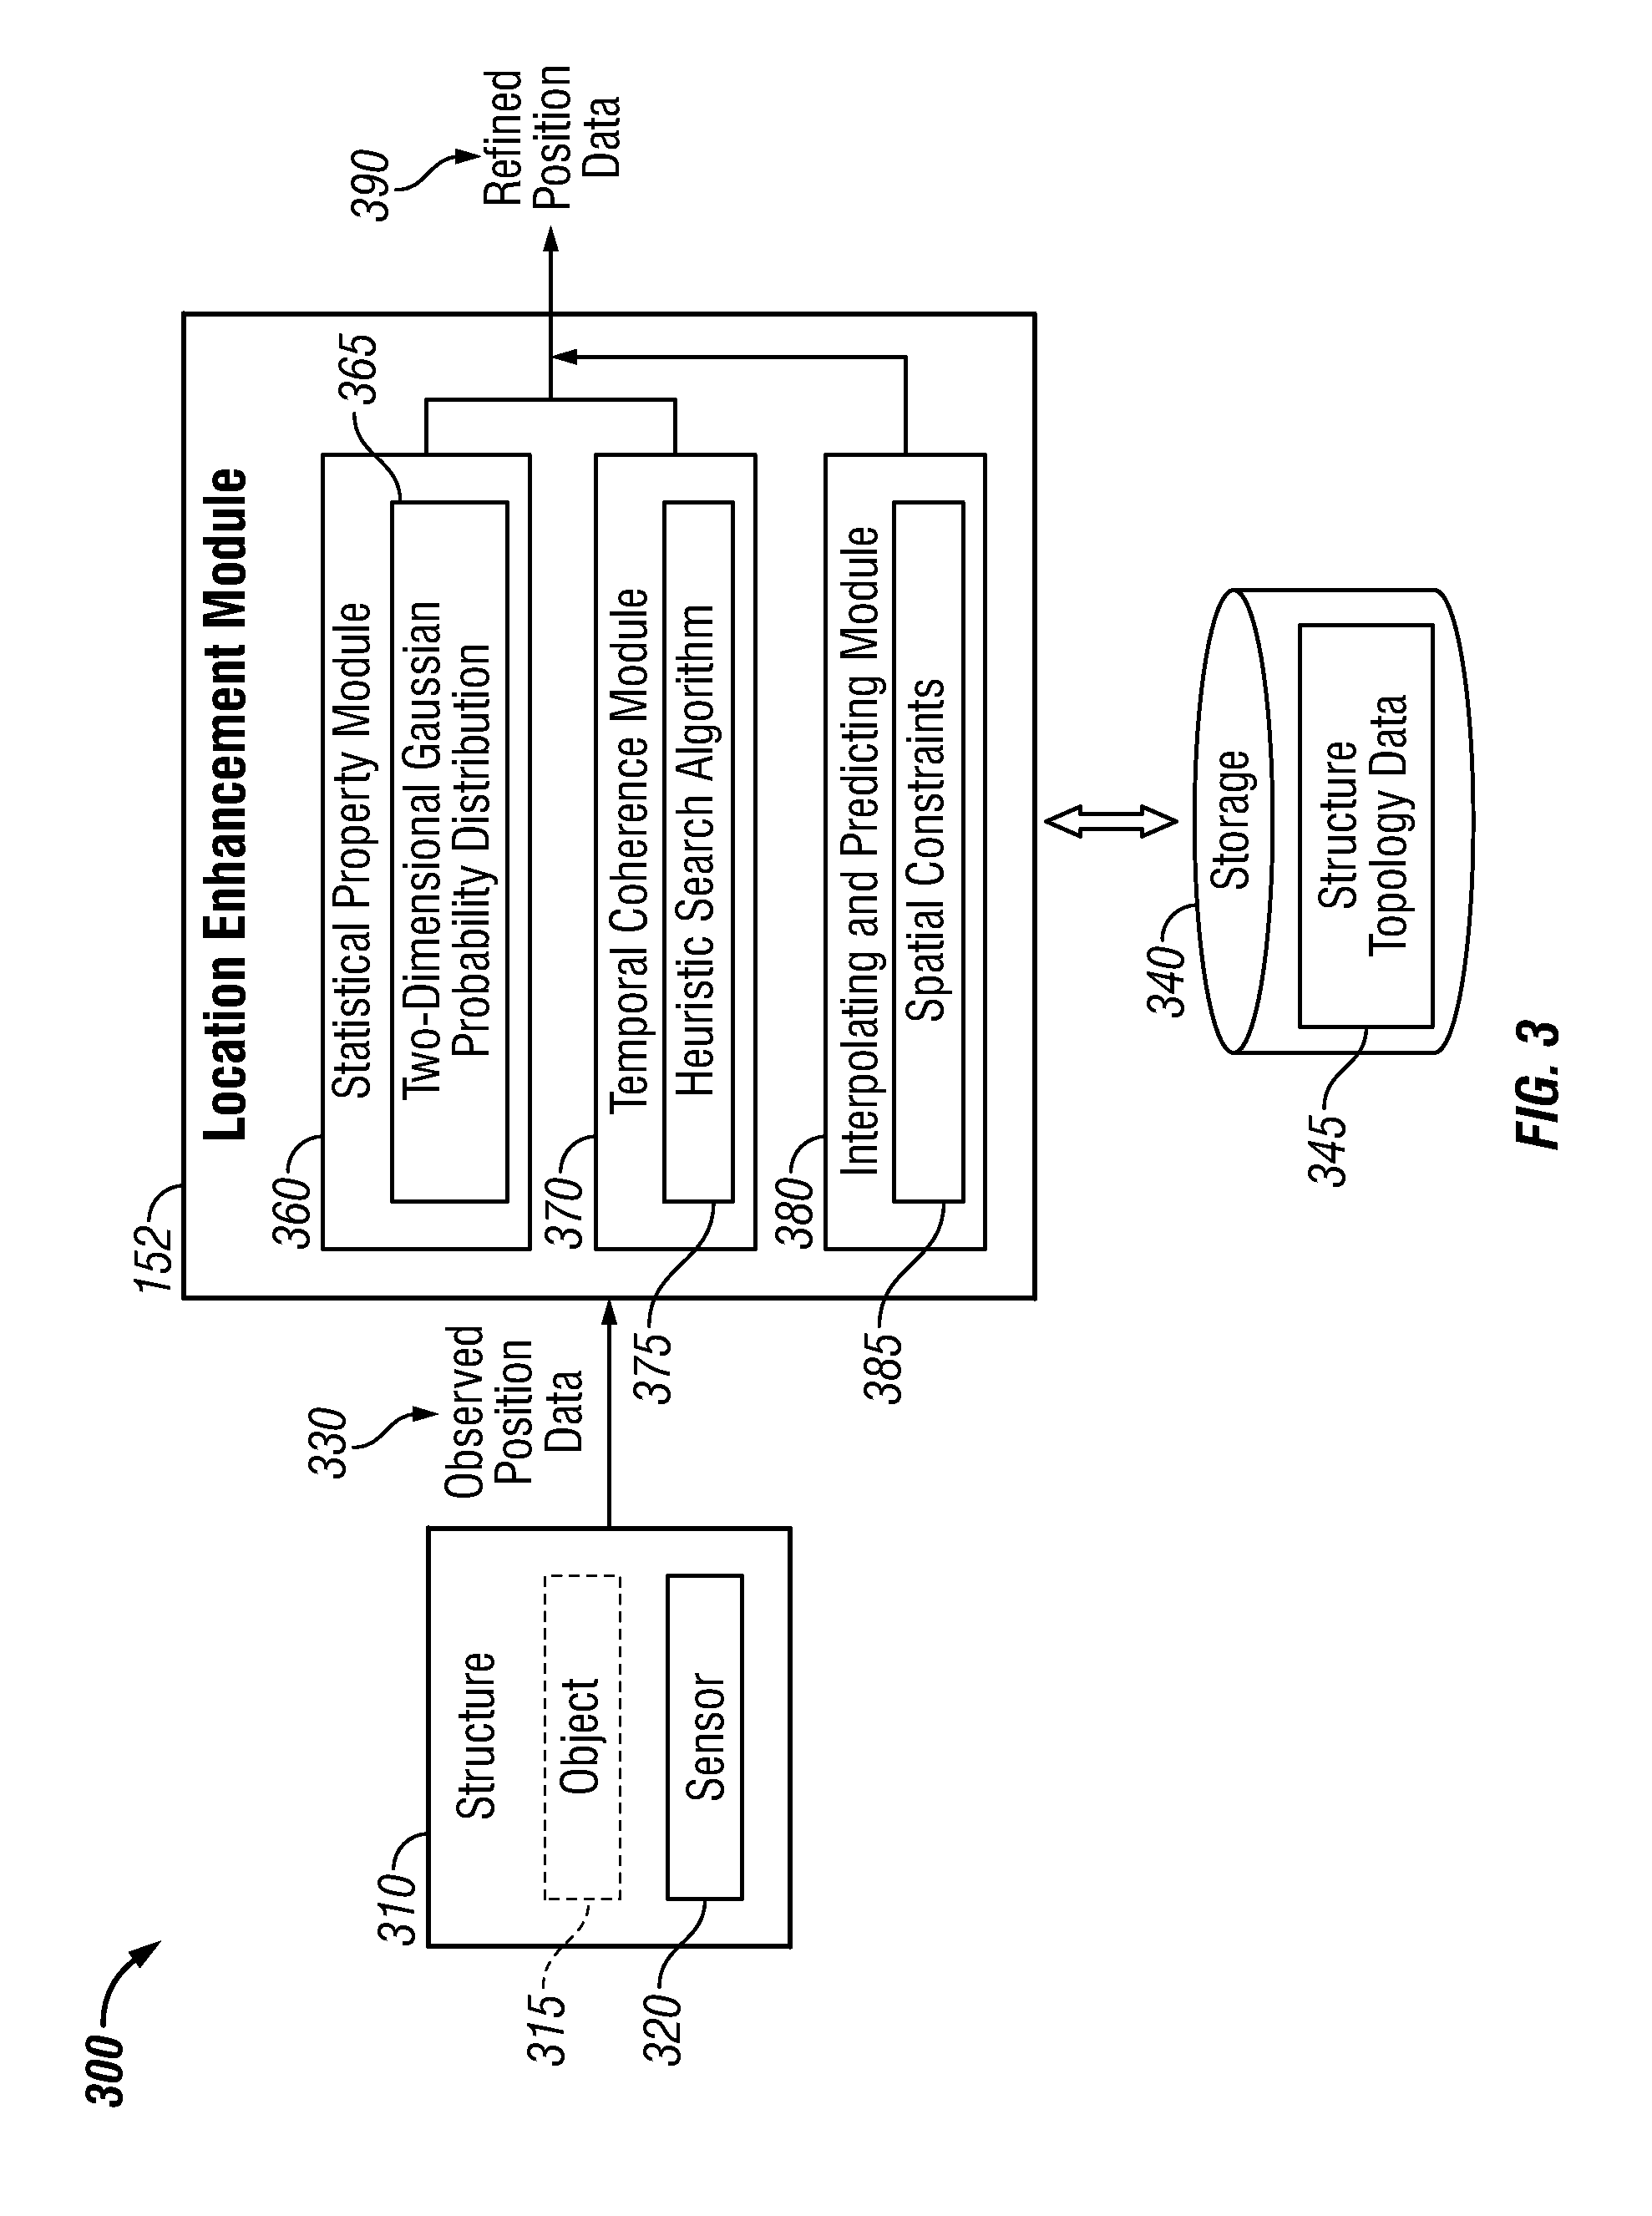 Location enhancement system and method based on topology constraints